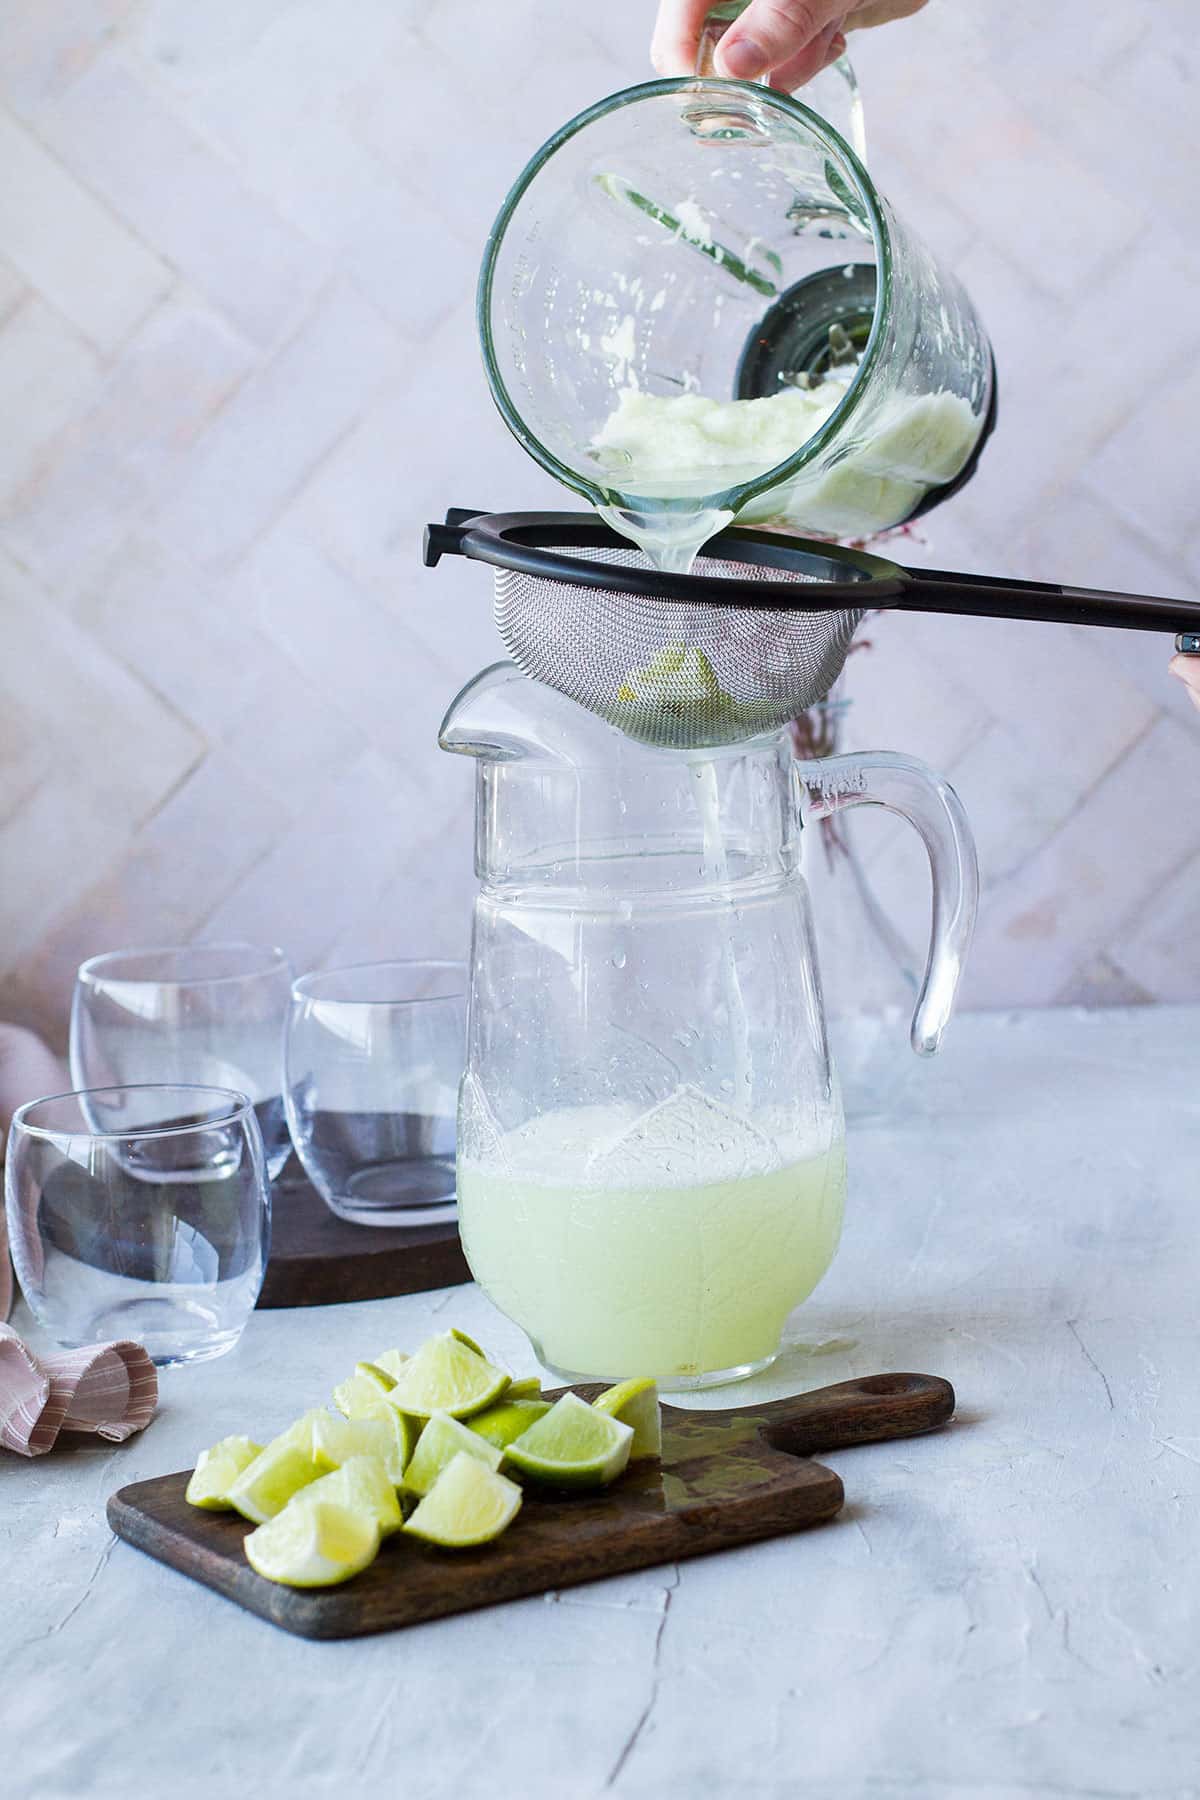 Straining the lemonade into a large pitcher.